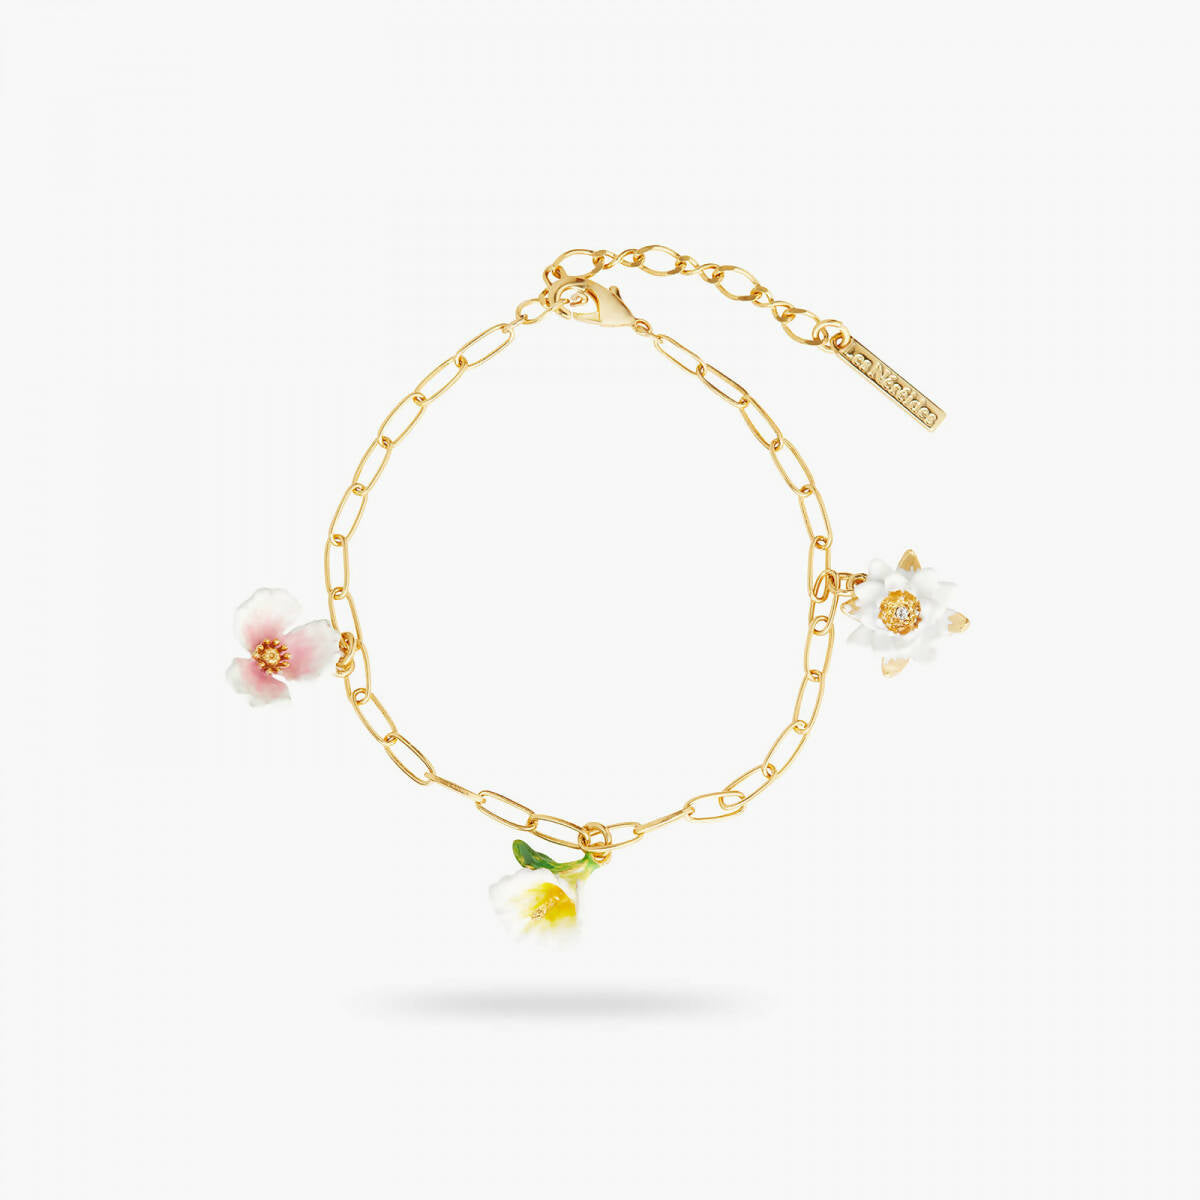 GOLD-PLATED LINKS AND FLOWER PENDANT BRACELET - Yooto